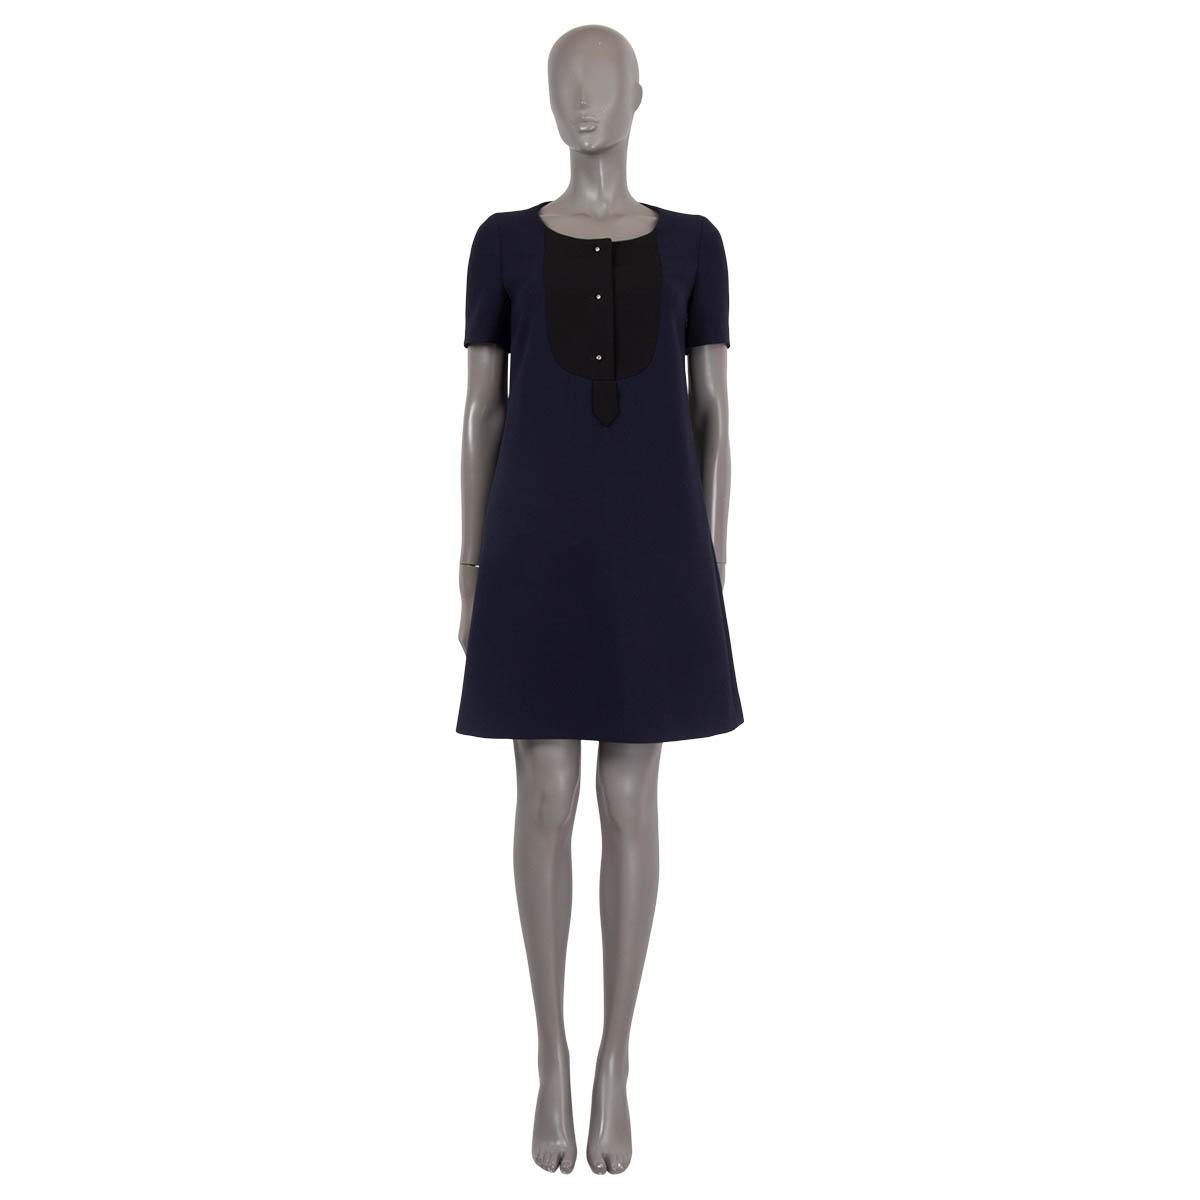 100% authentic Prada short sleeve A-line dress in navy wool (100%). Features a black plastron with three silver buttons and two pockets on the side. Opens with a zipper on the side. Lined in viscose (67%) and silk (33%). Has been worn and is in